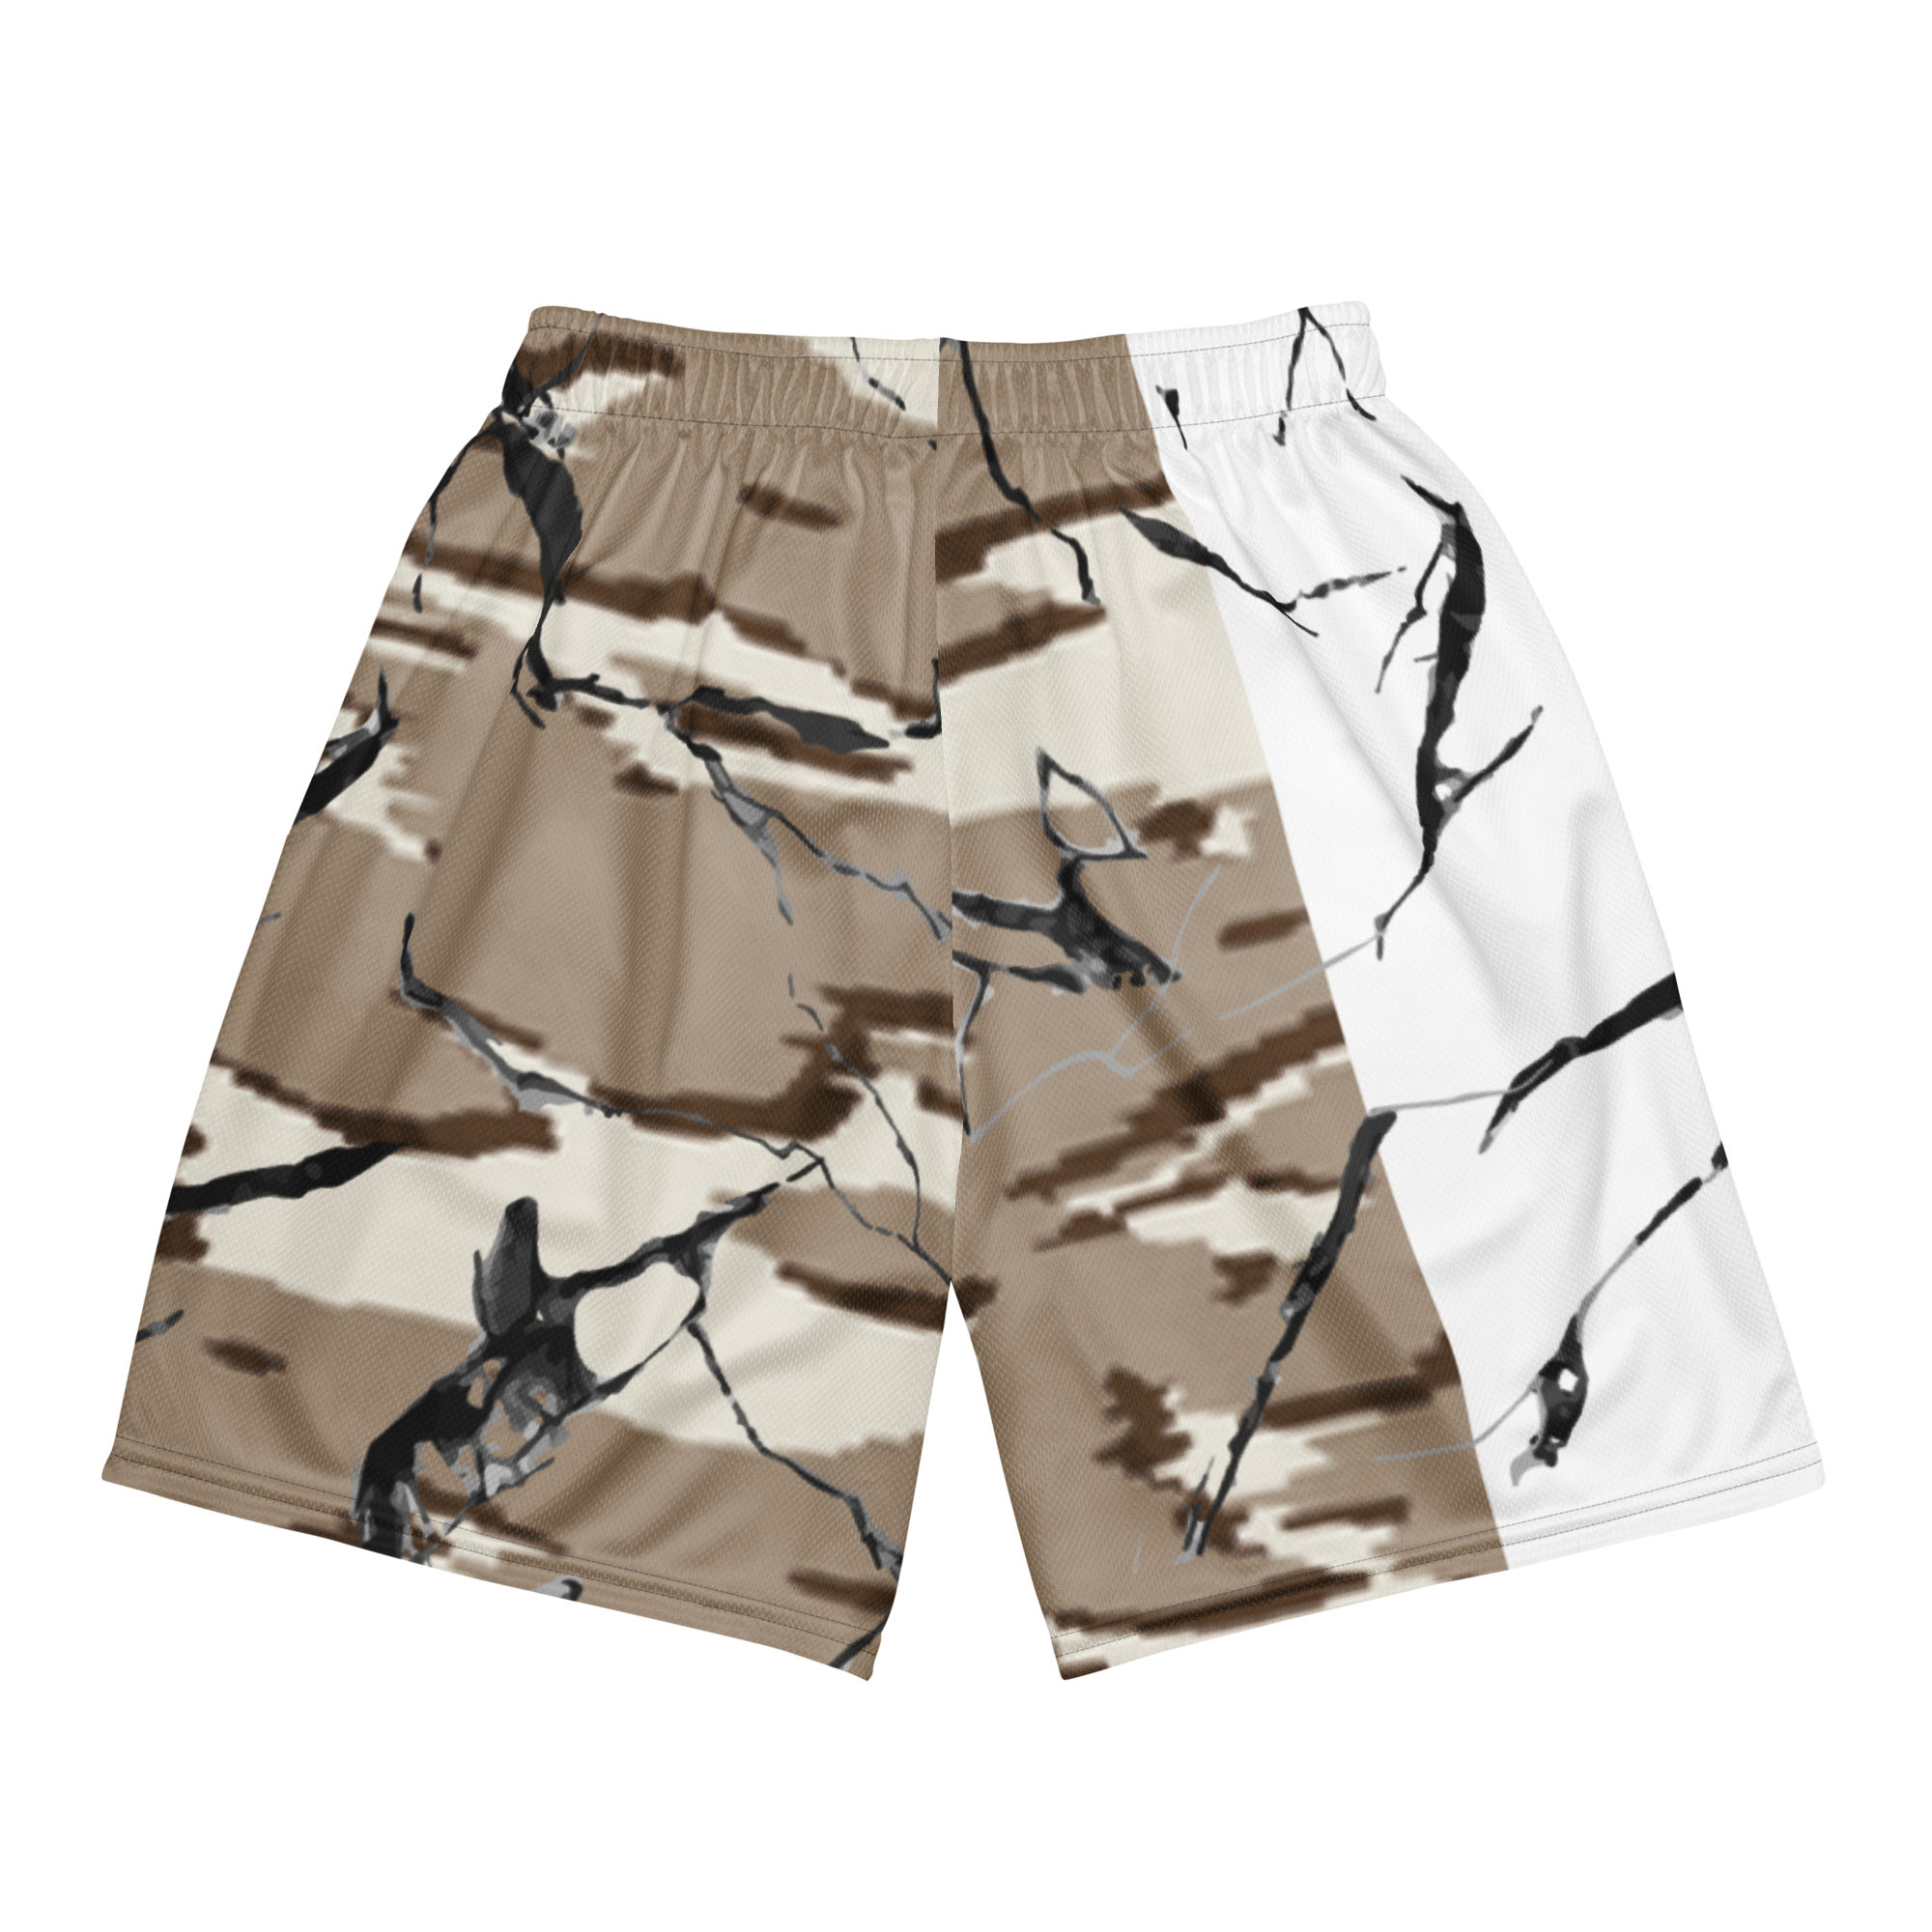 all-over-print-recycled-unisex-mesh-shorts-white-back-64d2692a6e0d4